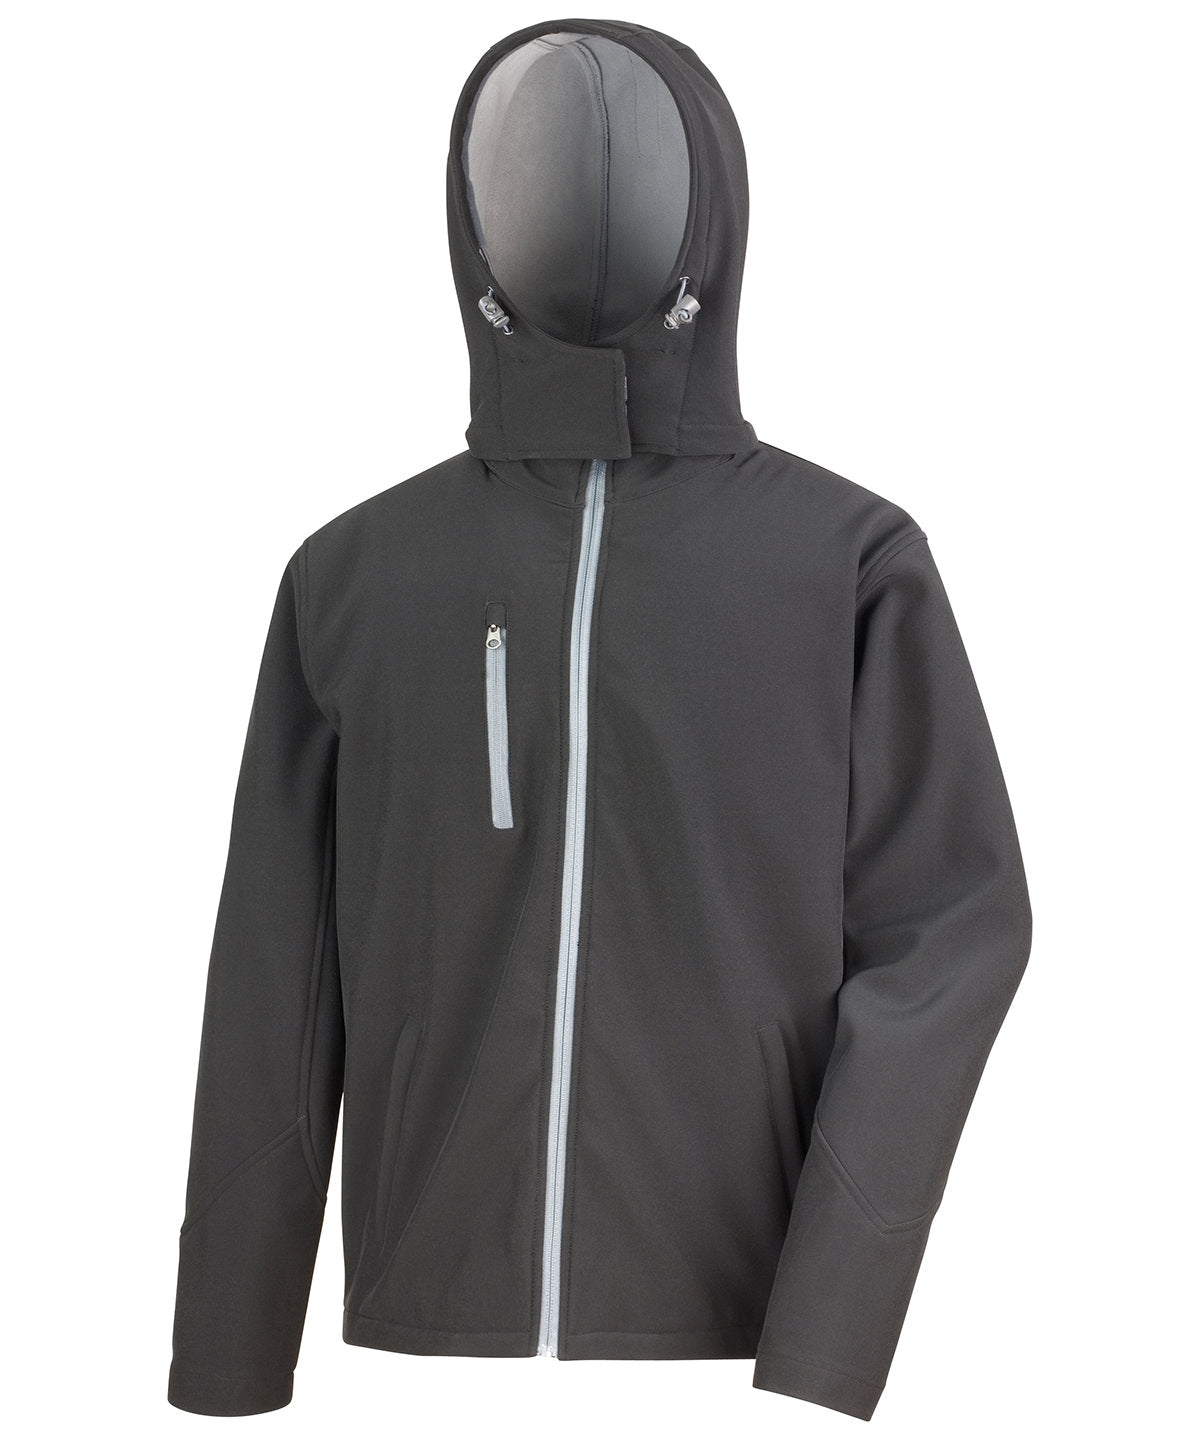 Personalised Jackets - Black Result Core Core TX performance hooded softshell jacket